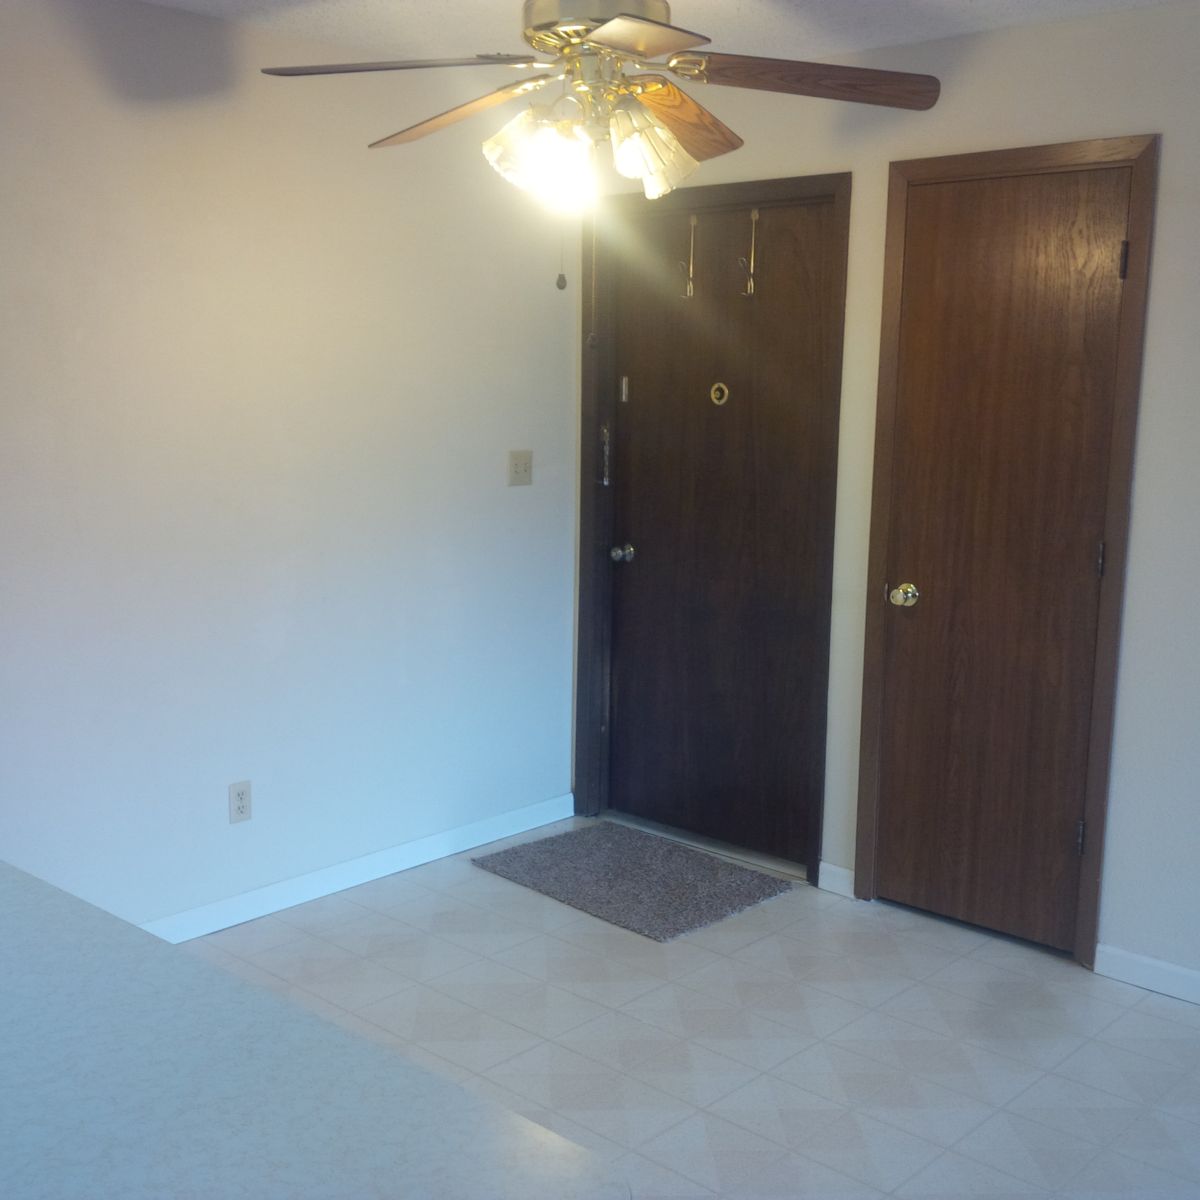 Apartment for rent in Highland, IL